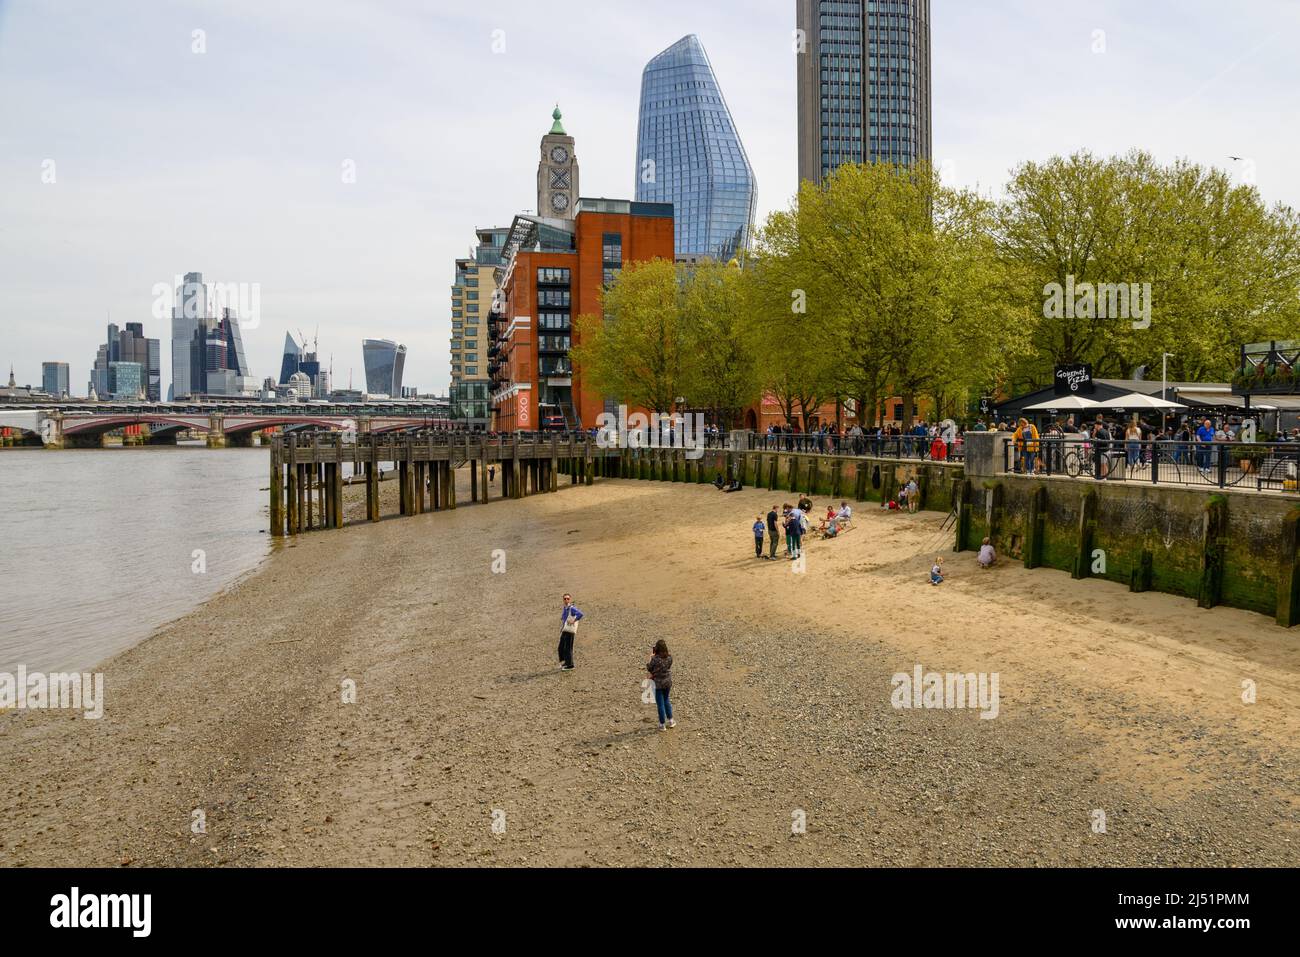 People on small sandy beach on the banks of The River Thames at low tide, South Bank, London, UK, April Stock Photo